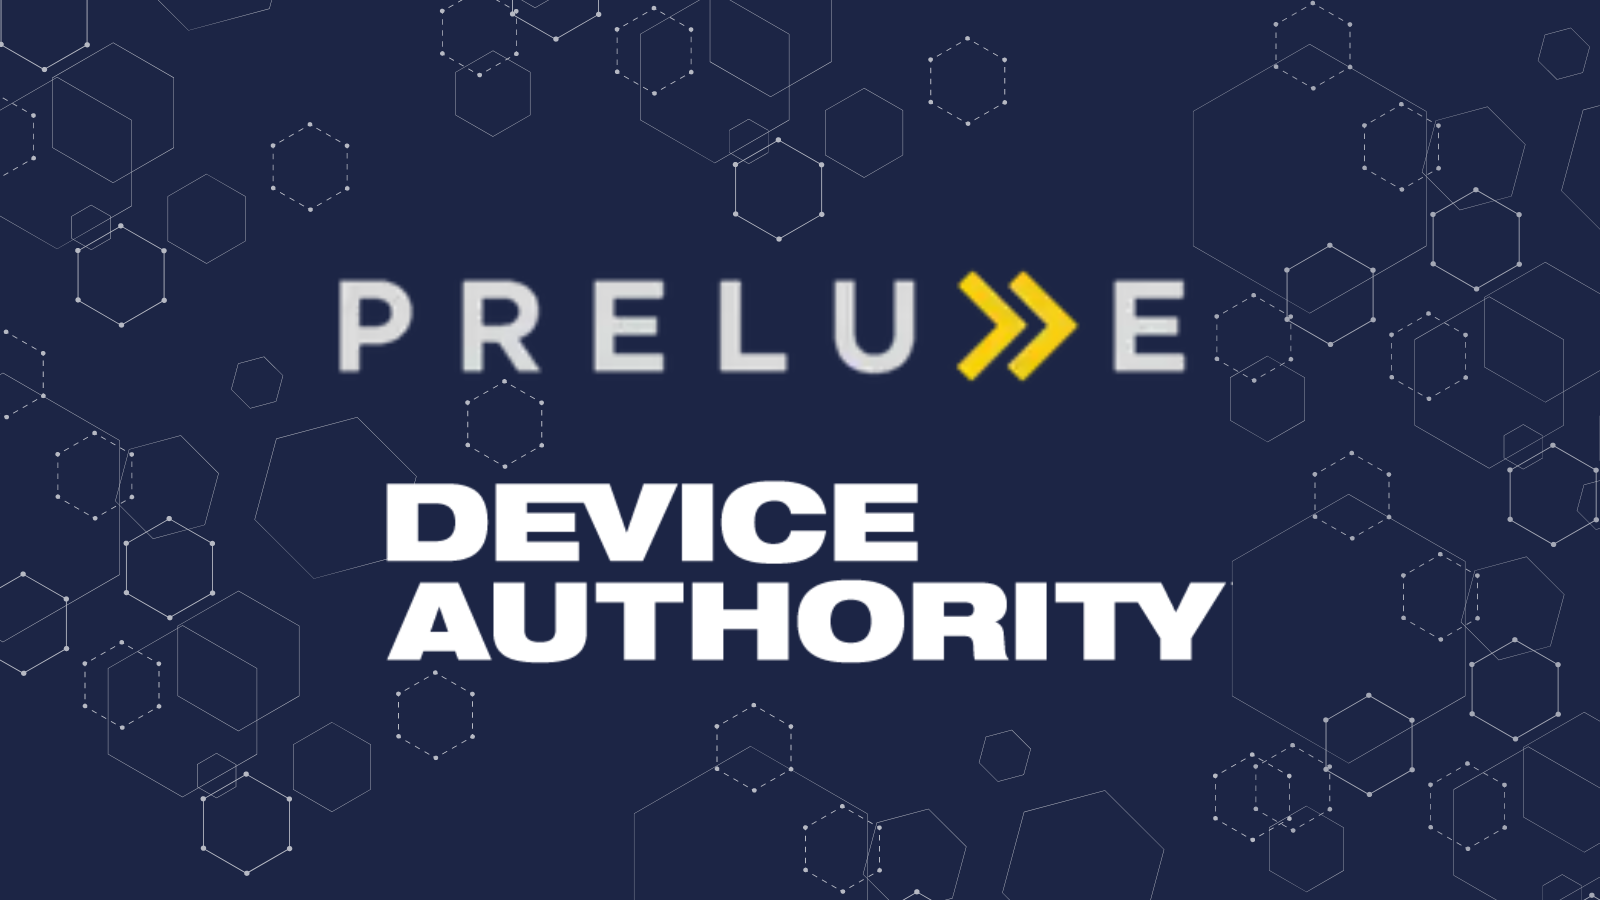 device authority and prelude logos